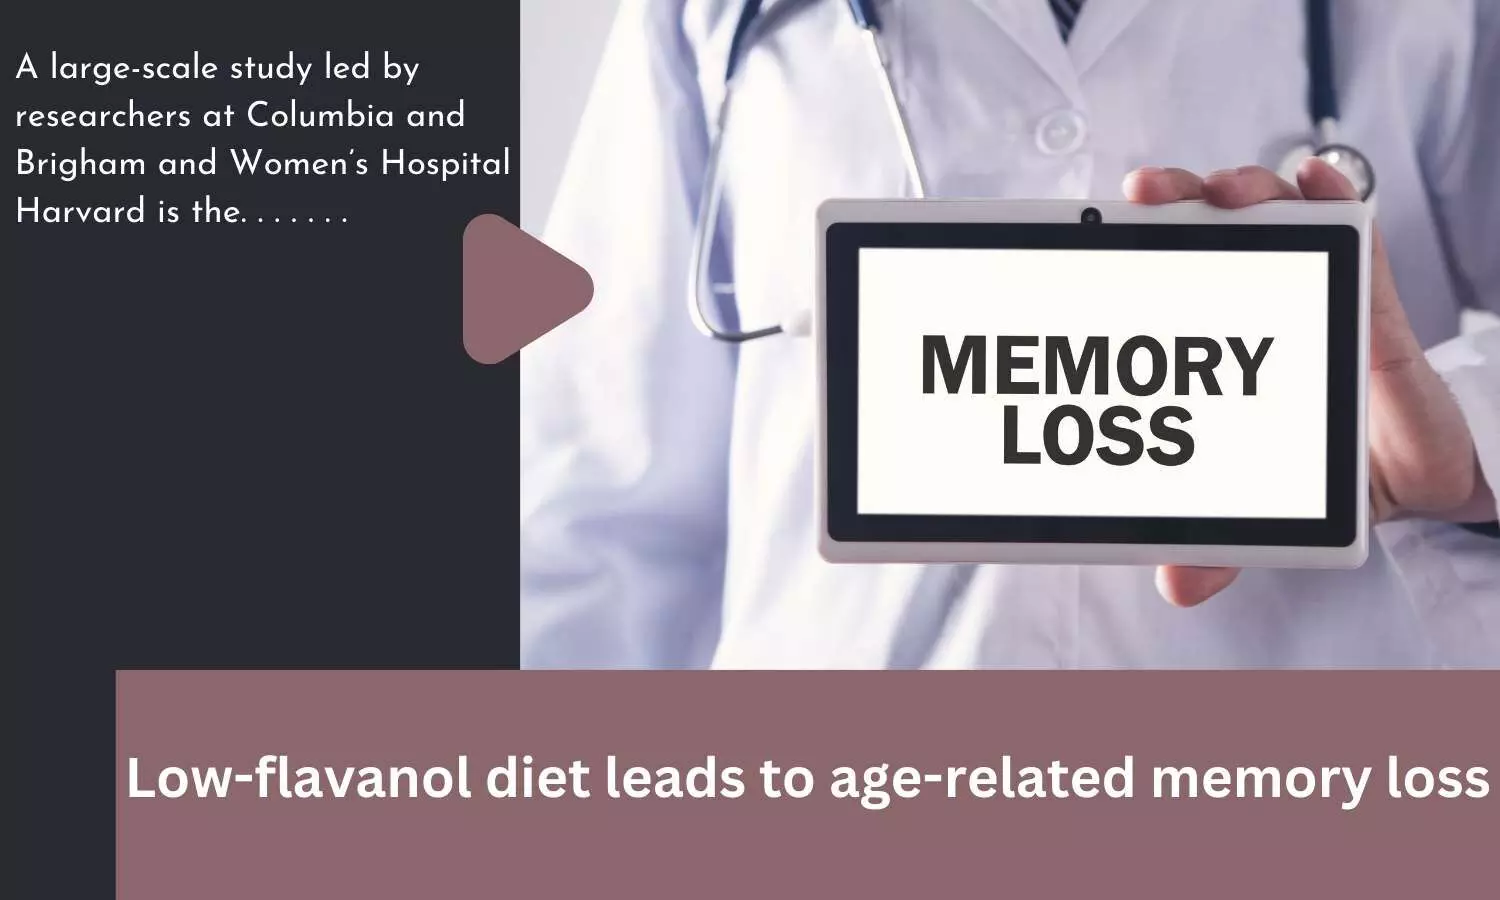 Low-flavanol diet leads to age-related memory loss